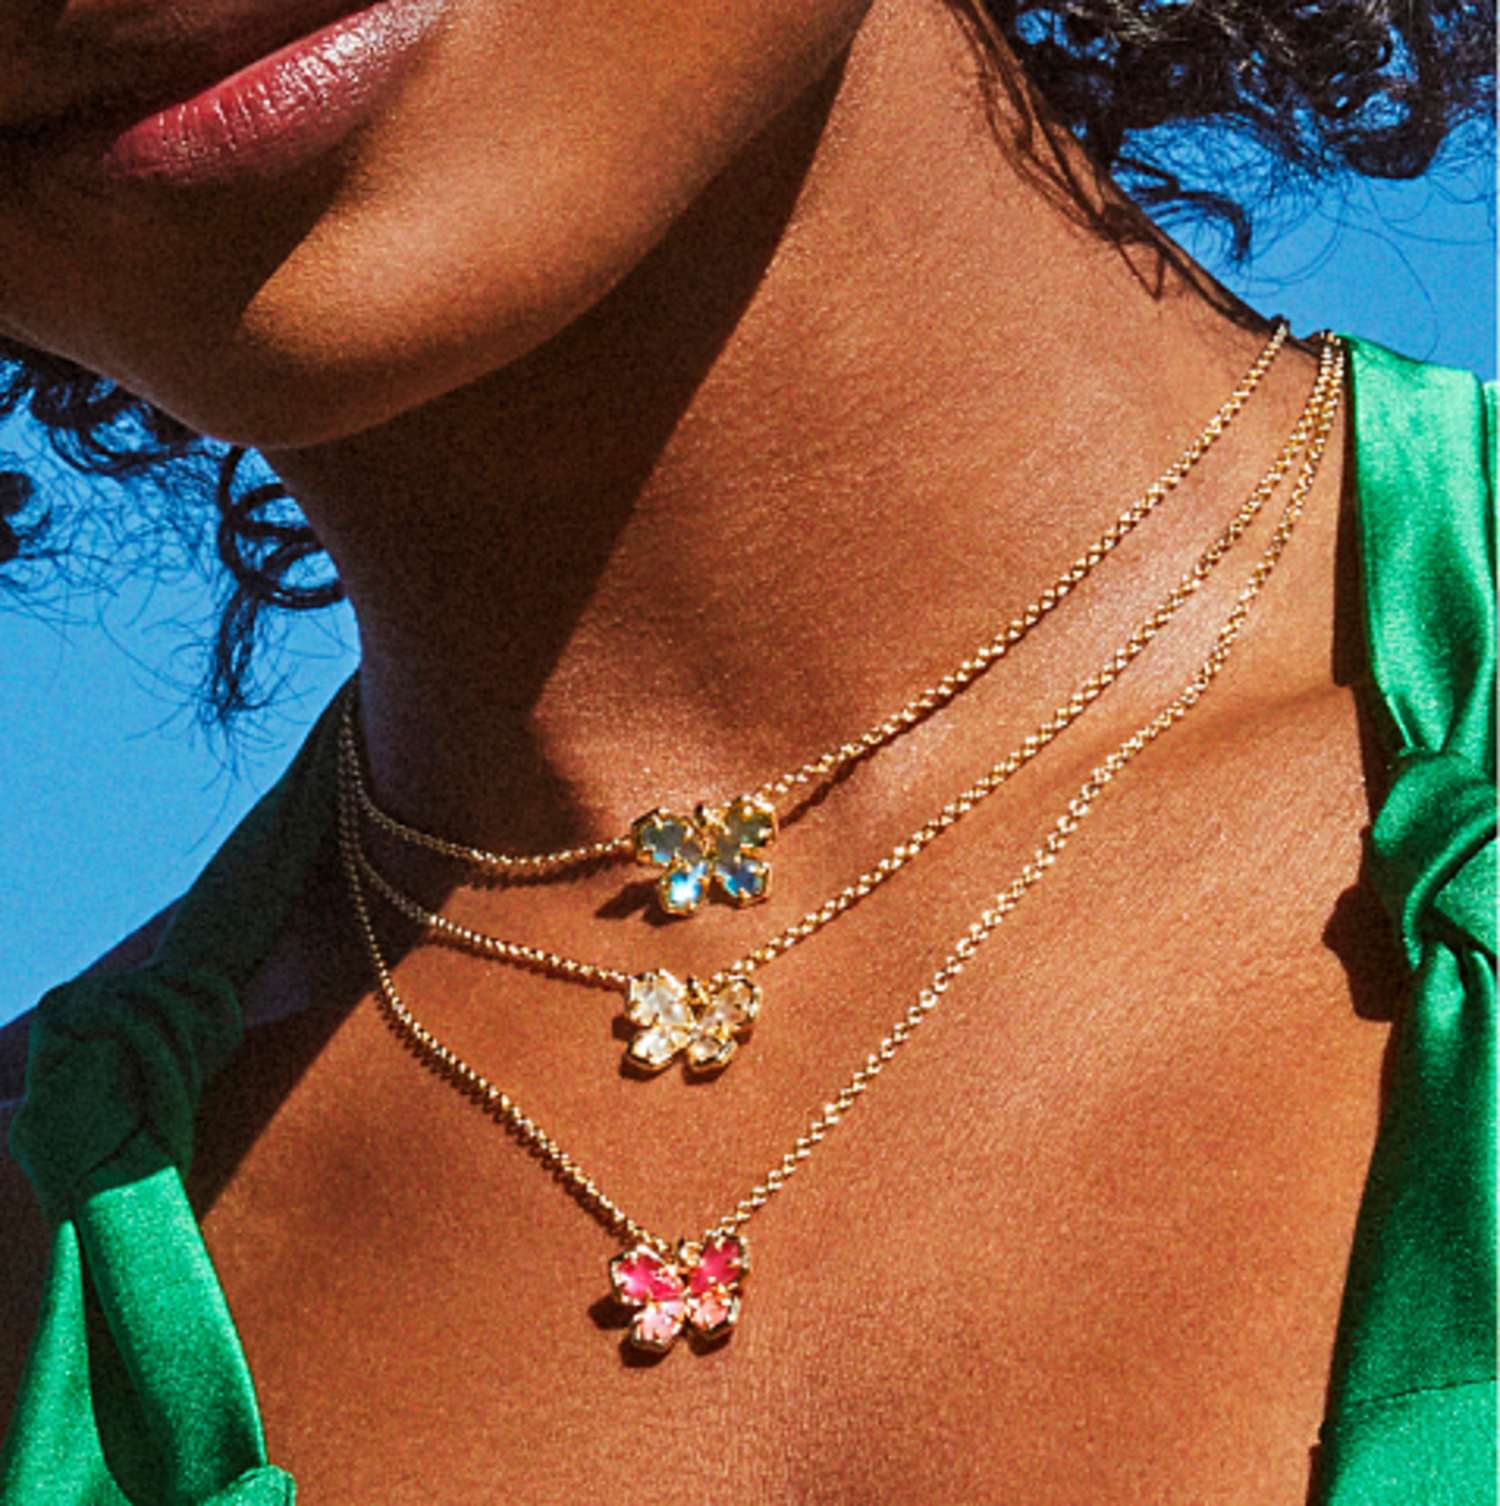 Image of necklace